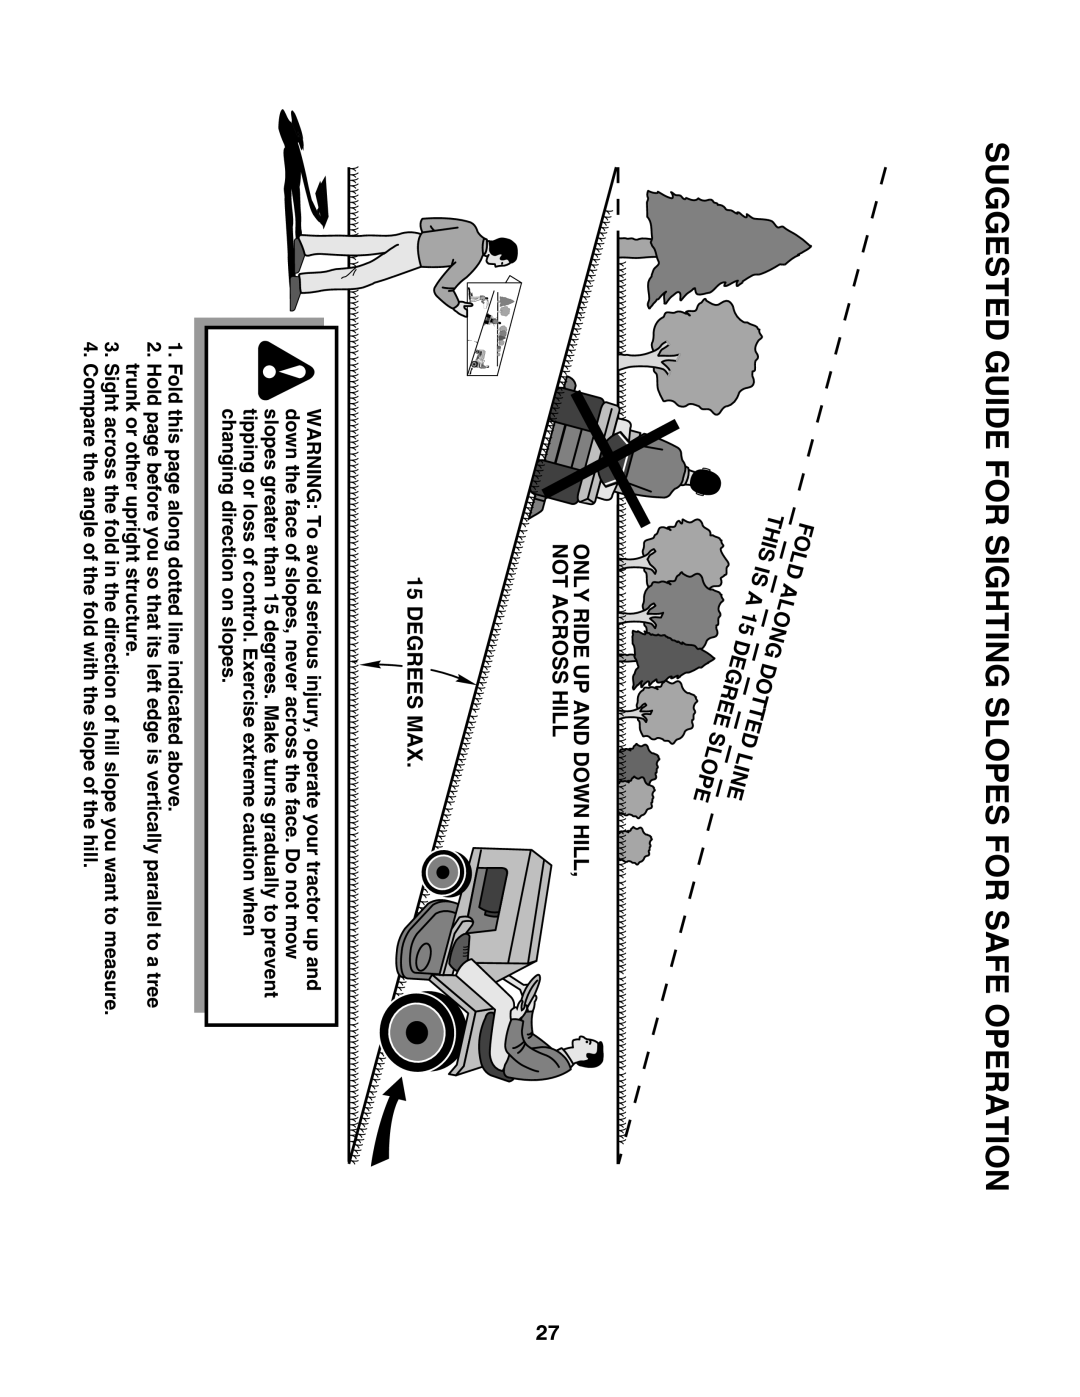 Poulan XT195H42LT manual Suggested Guide For Sighting Slopes For Safe Operation, Fold, Along, This, Dotted, Line, Degree 